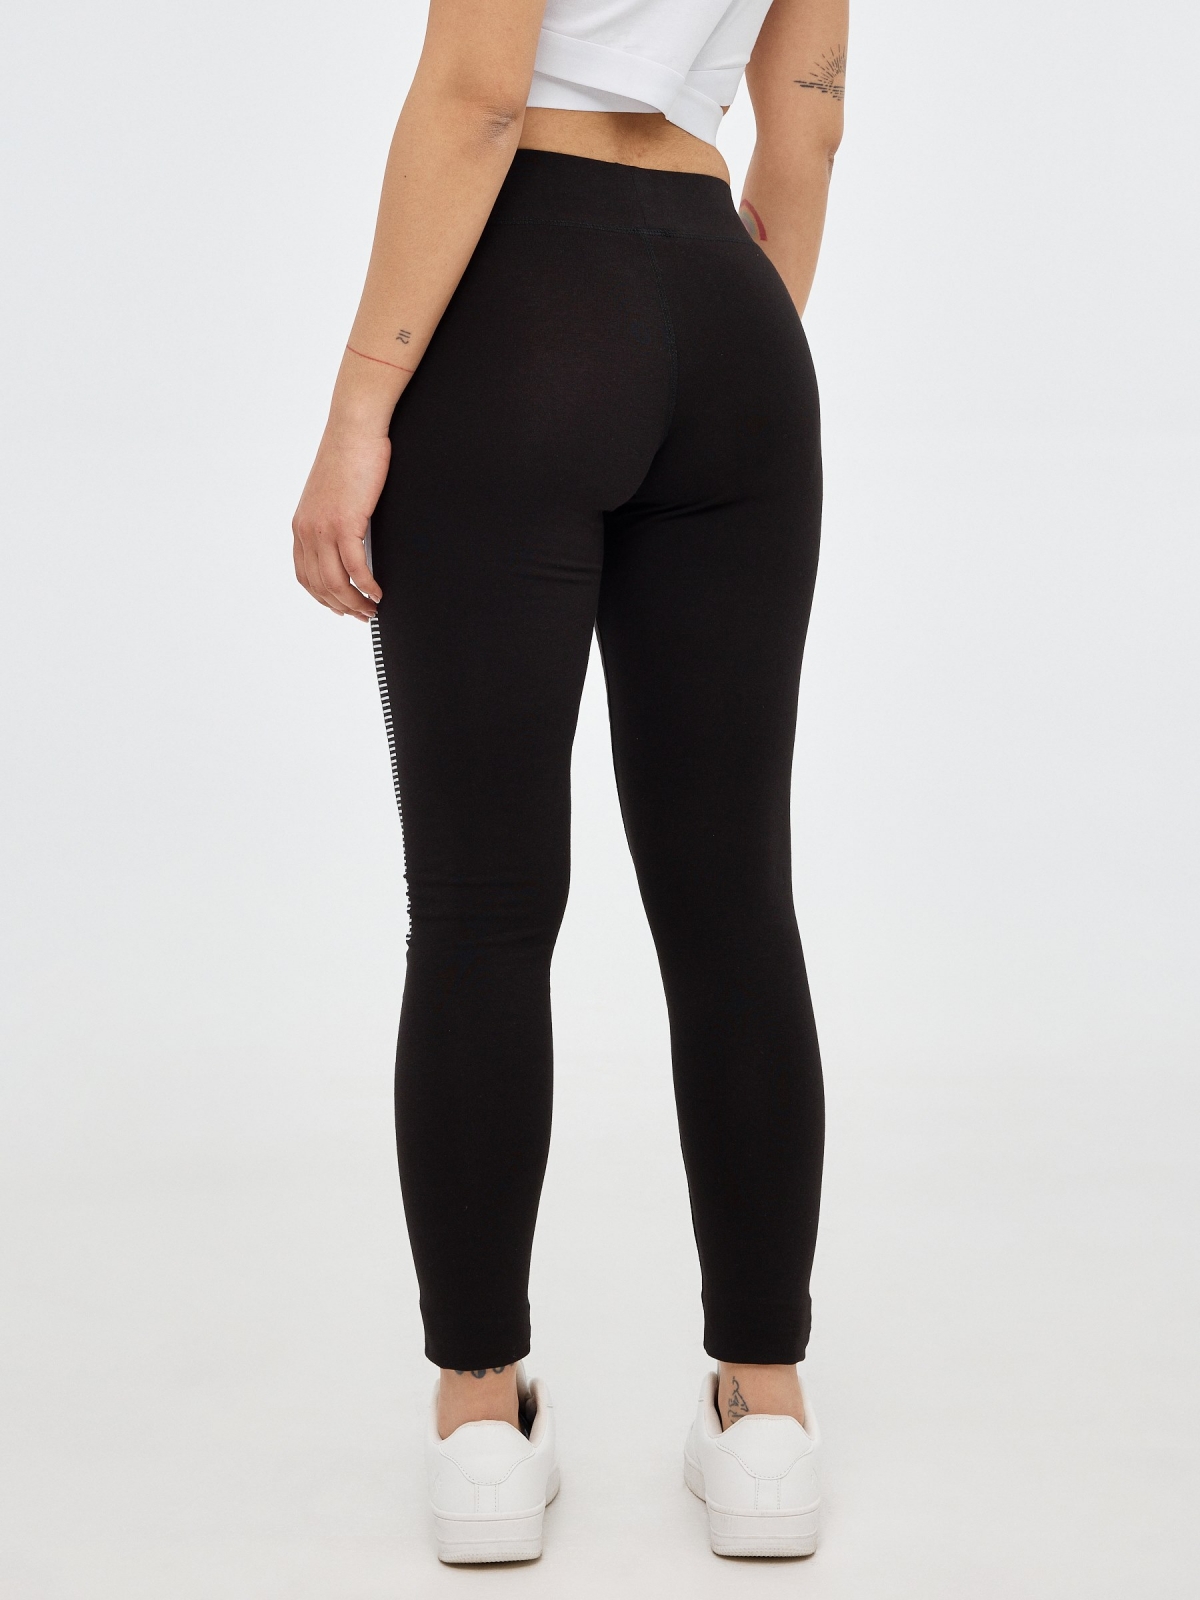 Legging with mesh detail black middle back view